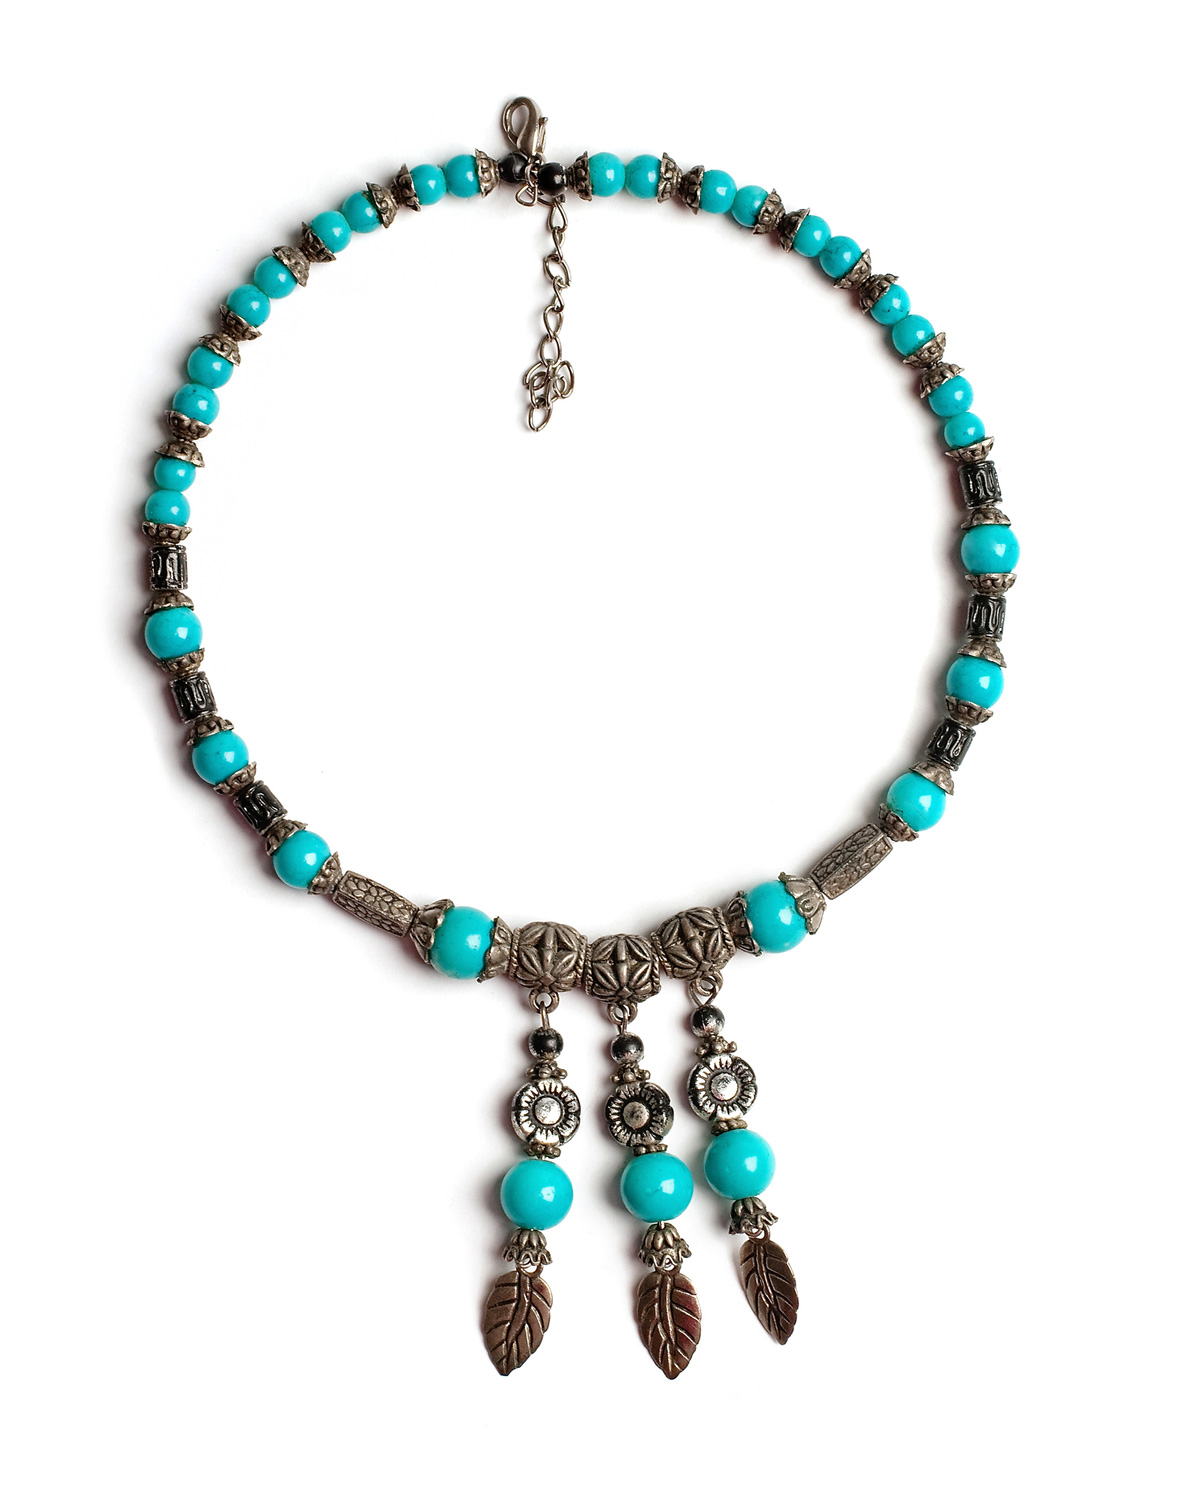 With Precious Elements Turquoise Purchasers you can now trade your native american jewelry online for cash and it has never been easier, visit our Arizona location in person if you live in Chandler Phoenix Gilbert Scottsdale Mesa Glendale Maricopa Tucson Casa Grande Payson Prescott Flagstaff Cave Creek or Sun City AZ | native american and more with our purchasers, turquoise, amber silver and more | Murphy, Plano, Richardson, Sachse, Wylie, Allen, Garland, Parker, Lucas, St. Paul, Rowlett, Lavon, Nevada, Fairview, McKinney, Greenville, Royse City, Melissa, Prosper Texas